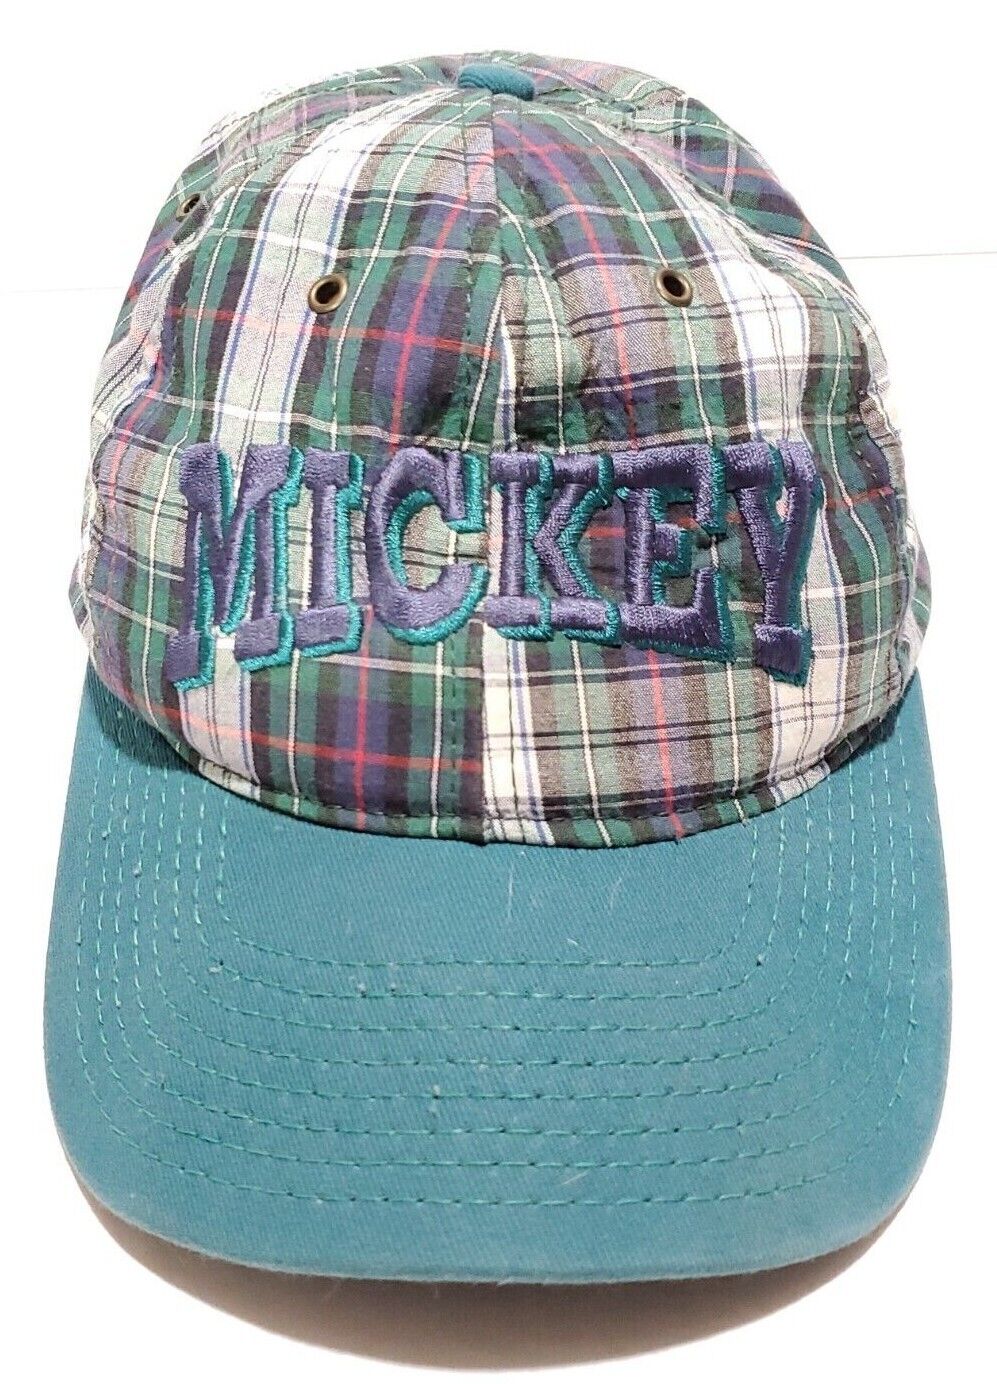 Vintage Mickey Mouse Plaid Hat Snapback Since 1928 Disney Store Made In USA Cap